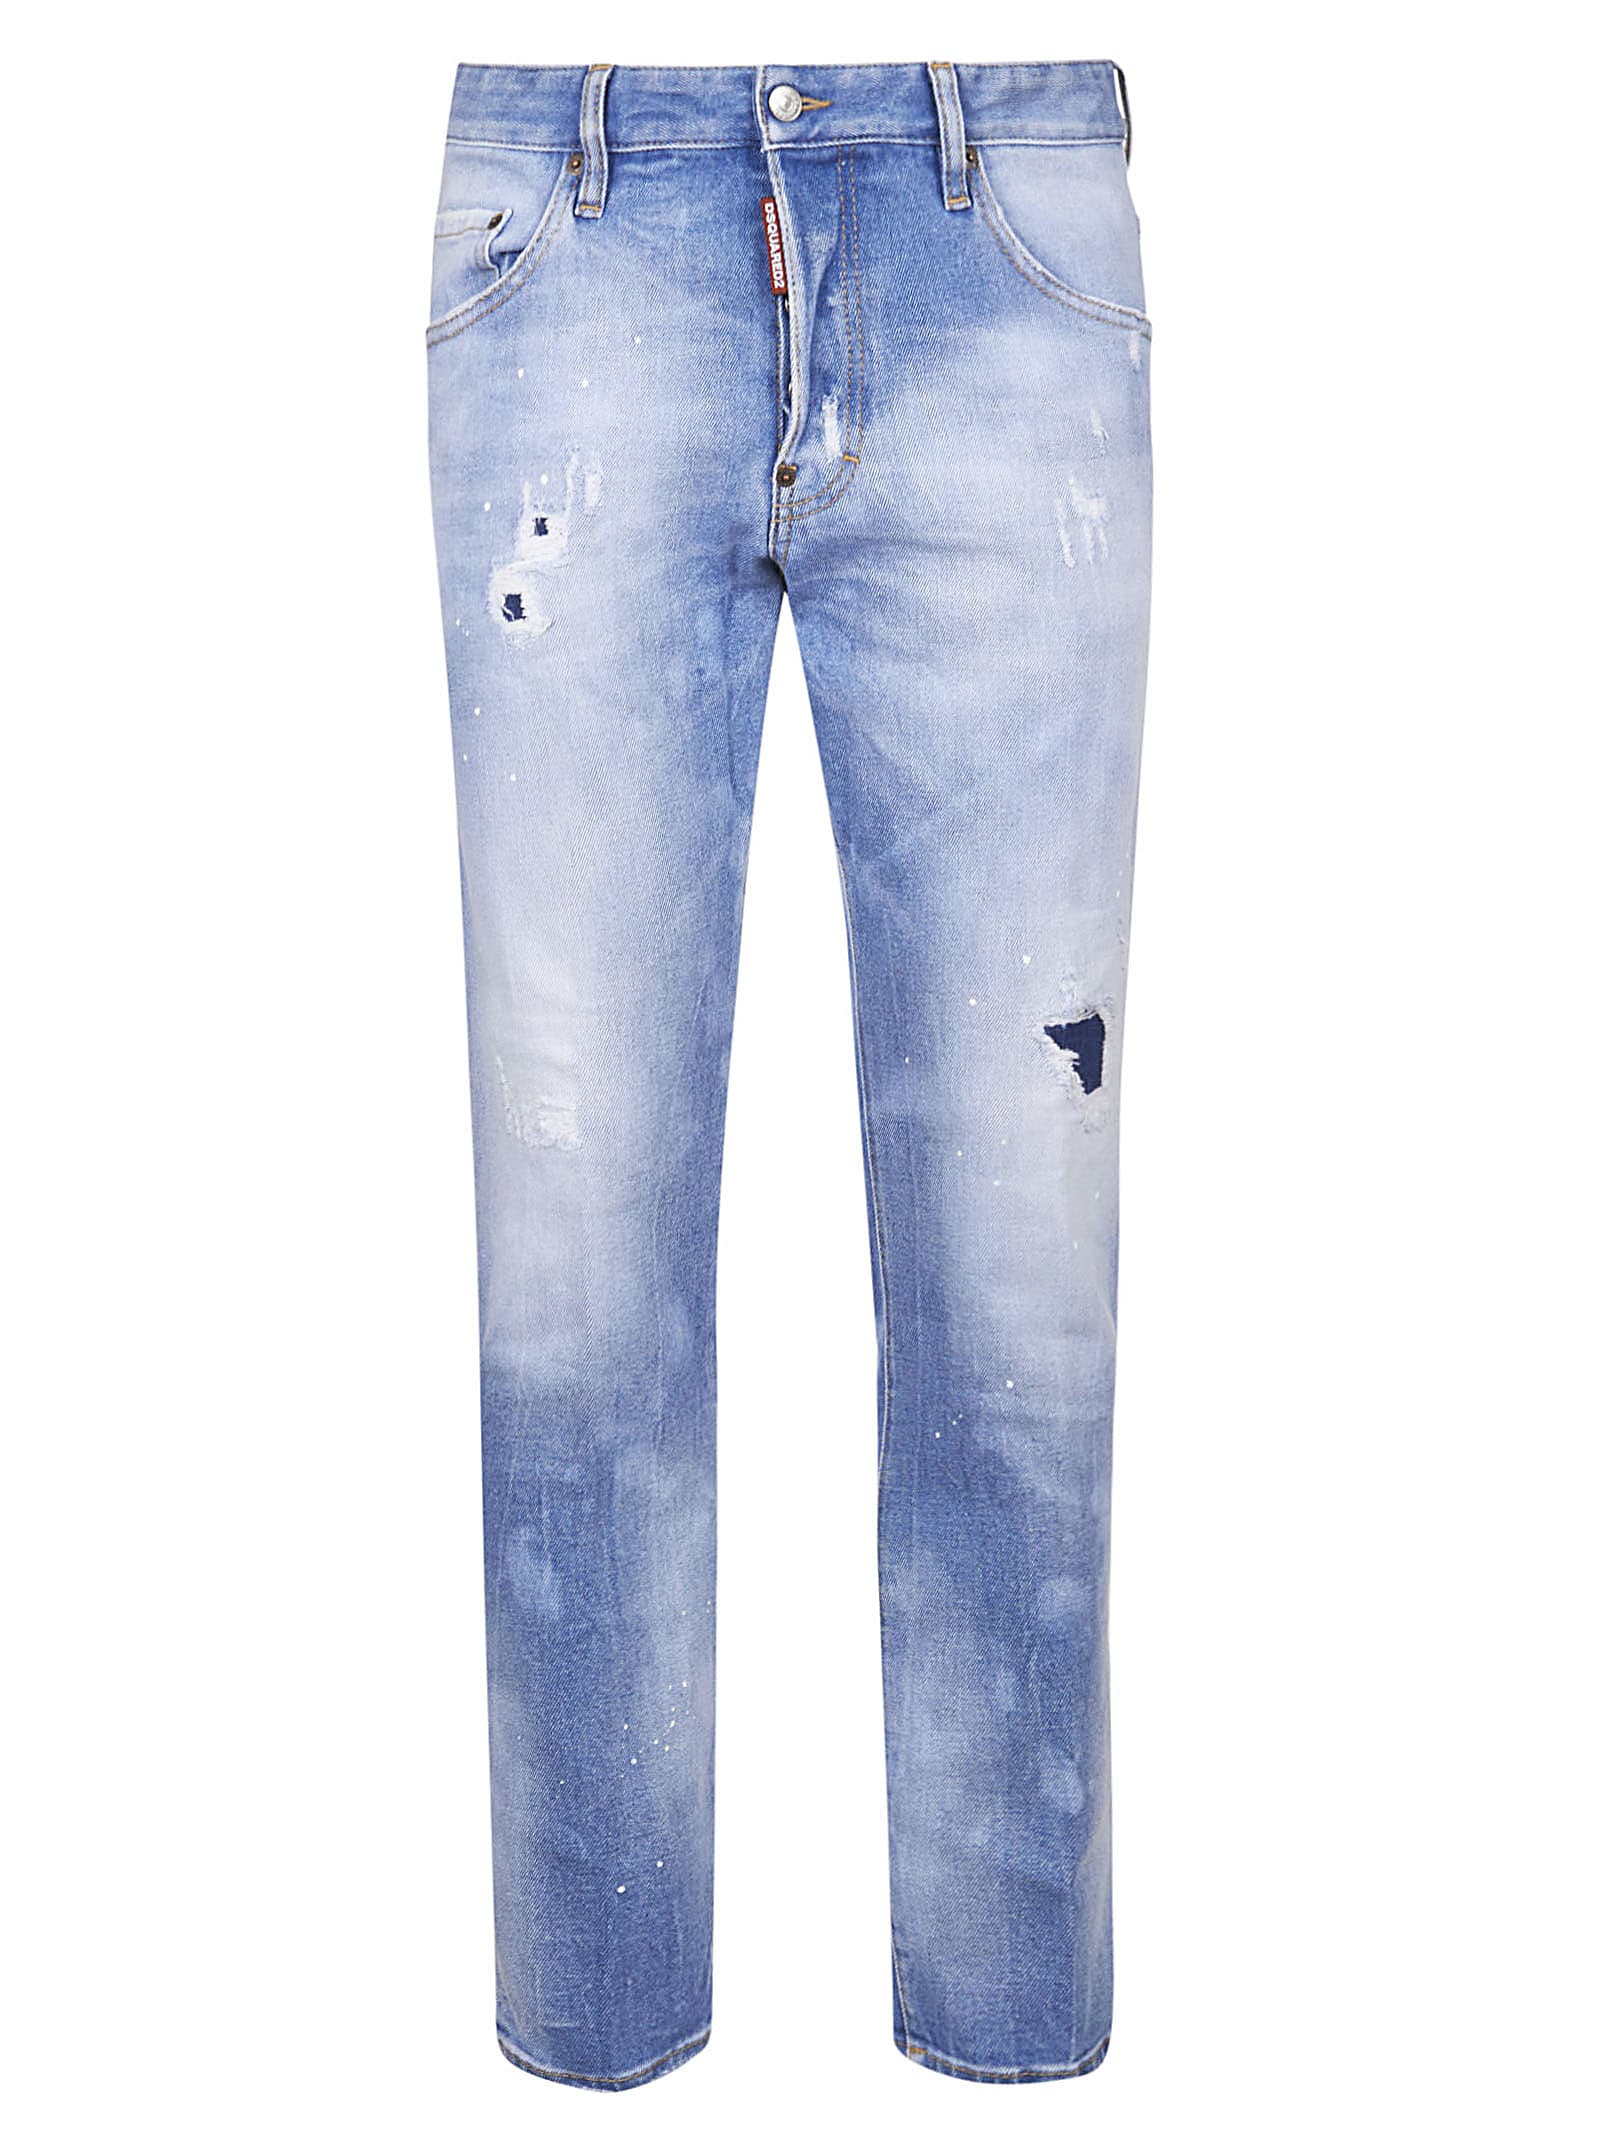 DSQUARED2 DISTRESSED EFFECT JEANS,11224576